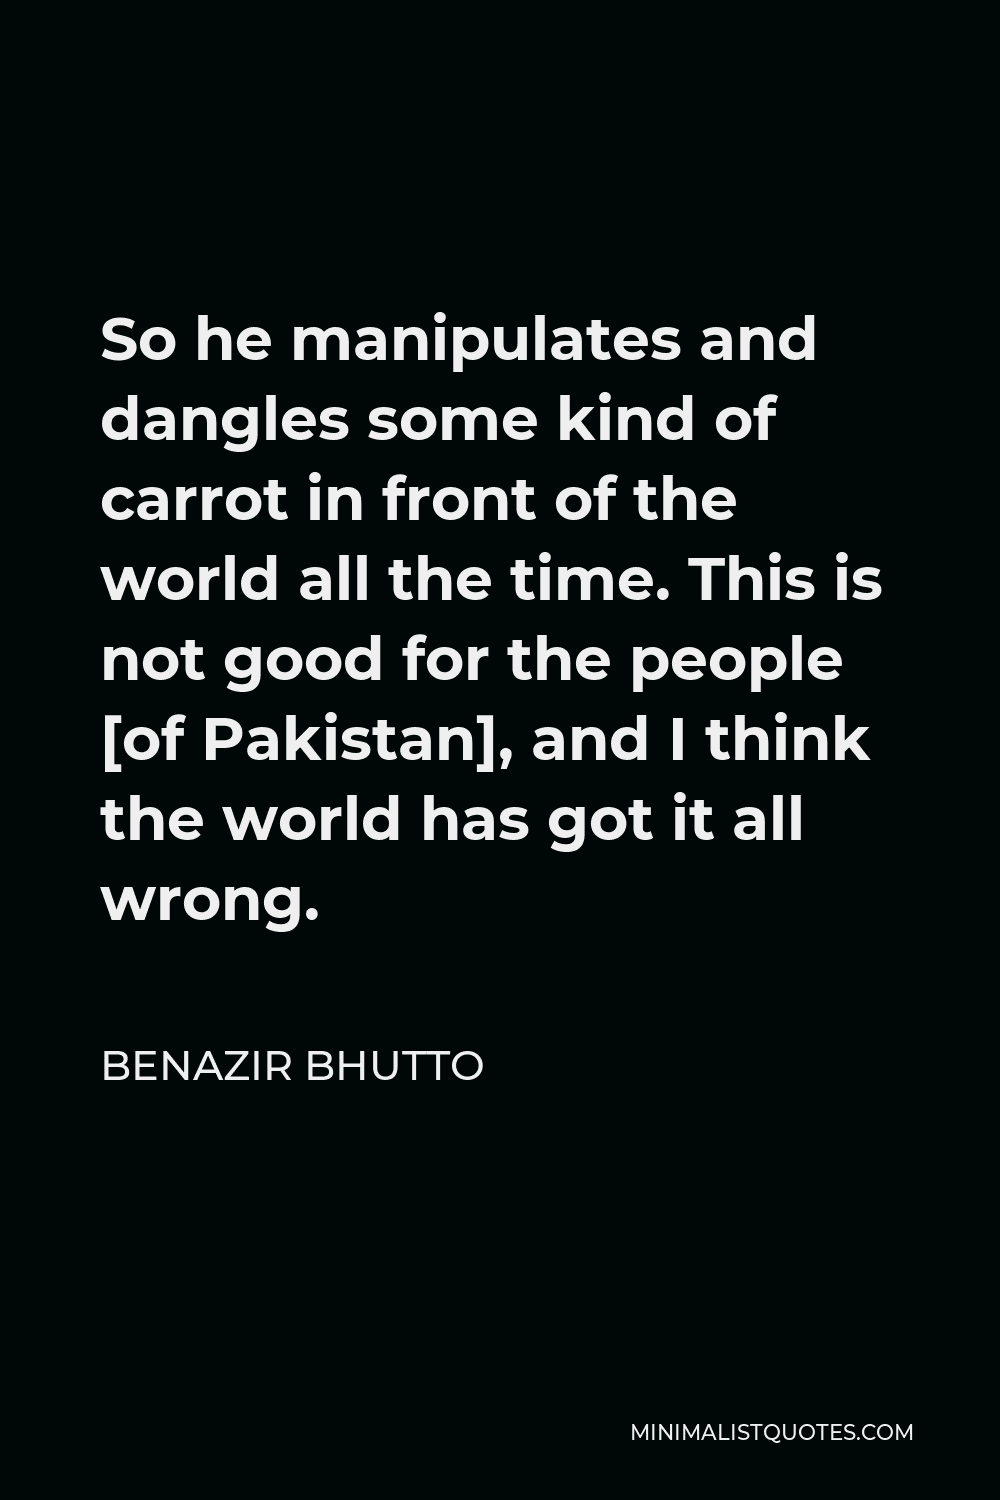 Benazir Bhutto Quote - So he manipulates and dangles some kind of carrot in front of the world all the time. This is not good for the people [of Pakistan], and I think the world has got it all wrong.